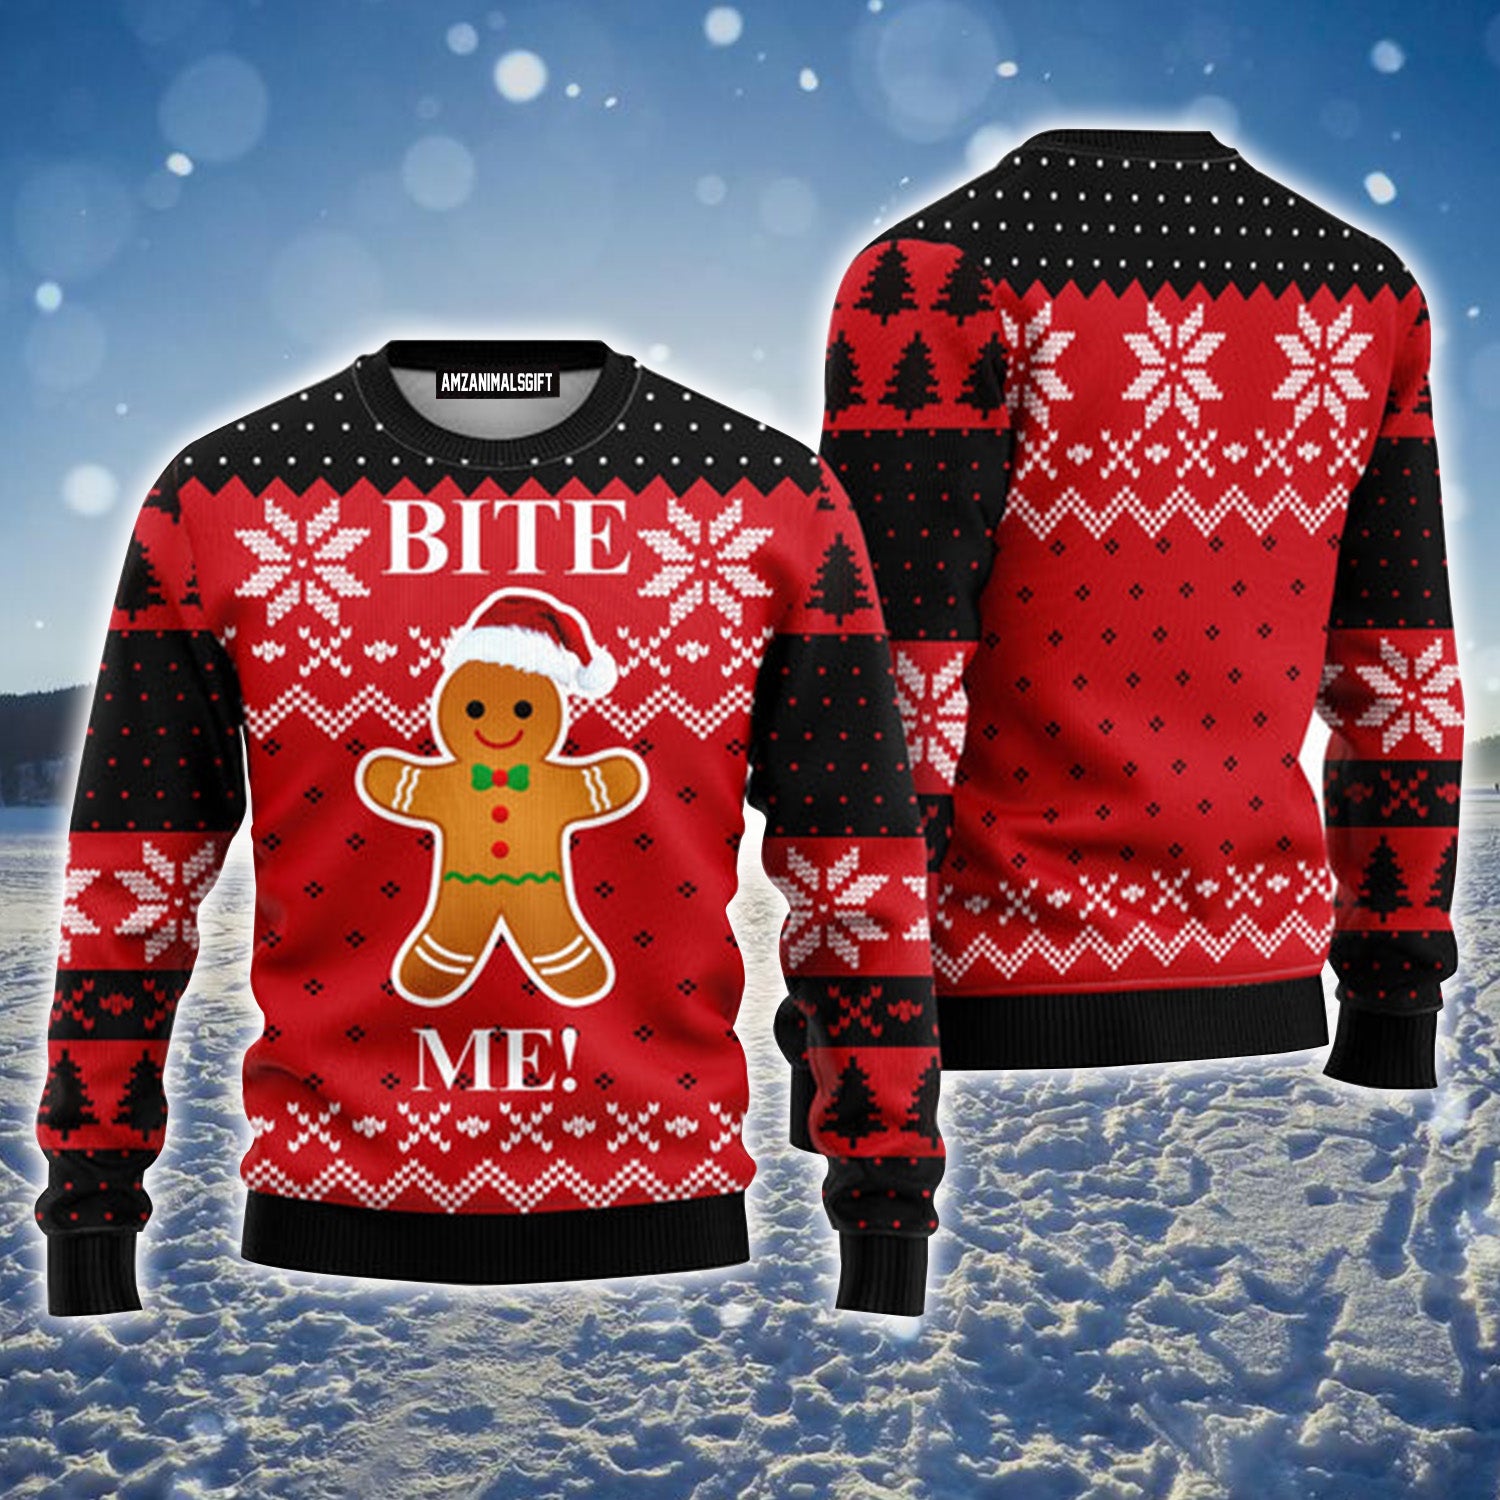 Gingerbread Bite Me Red Urly Christmas Sweater, Christmas Sweater For Men & Women - Perfect Gift For Christmas, Family, Friends